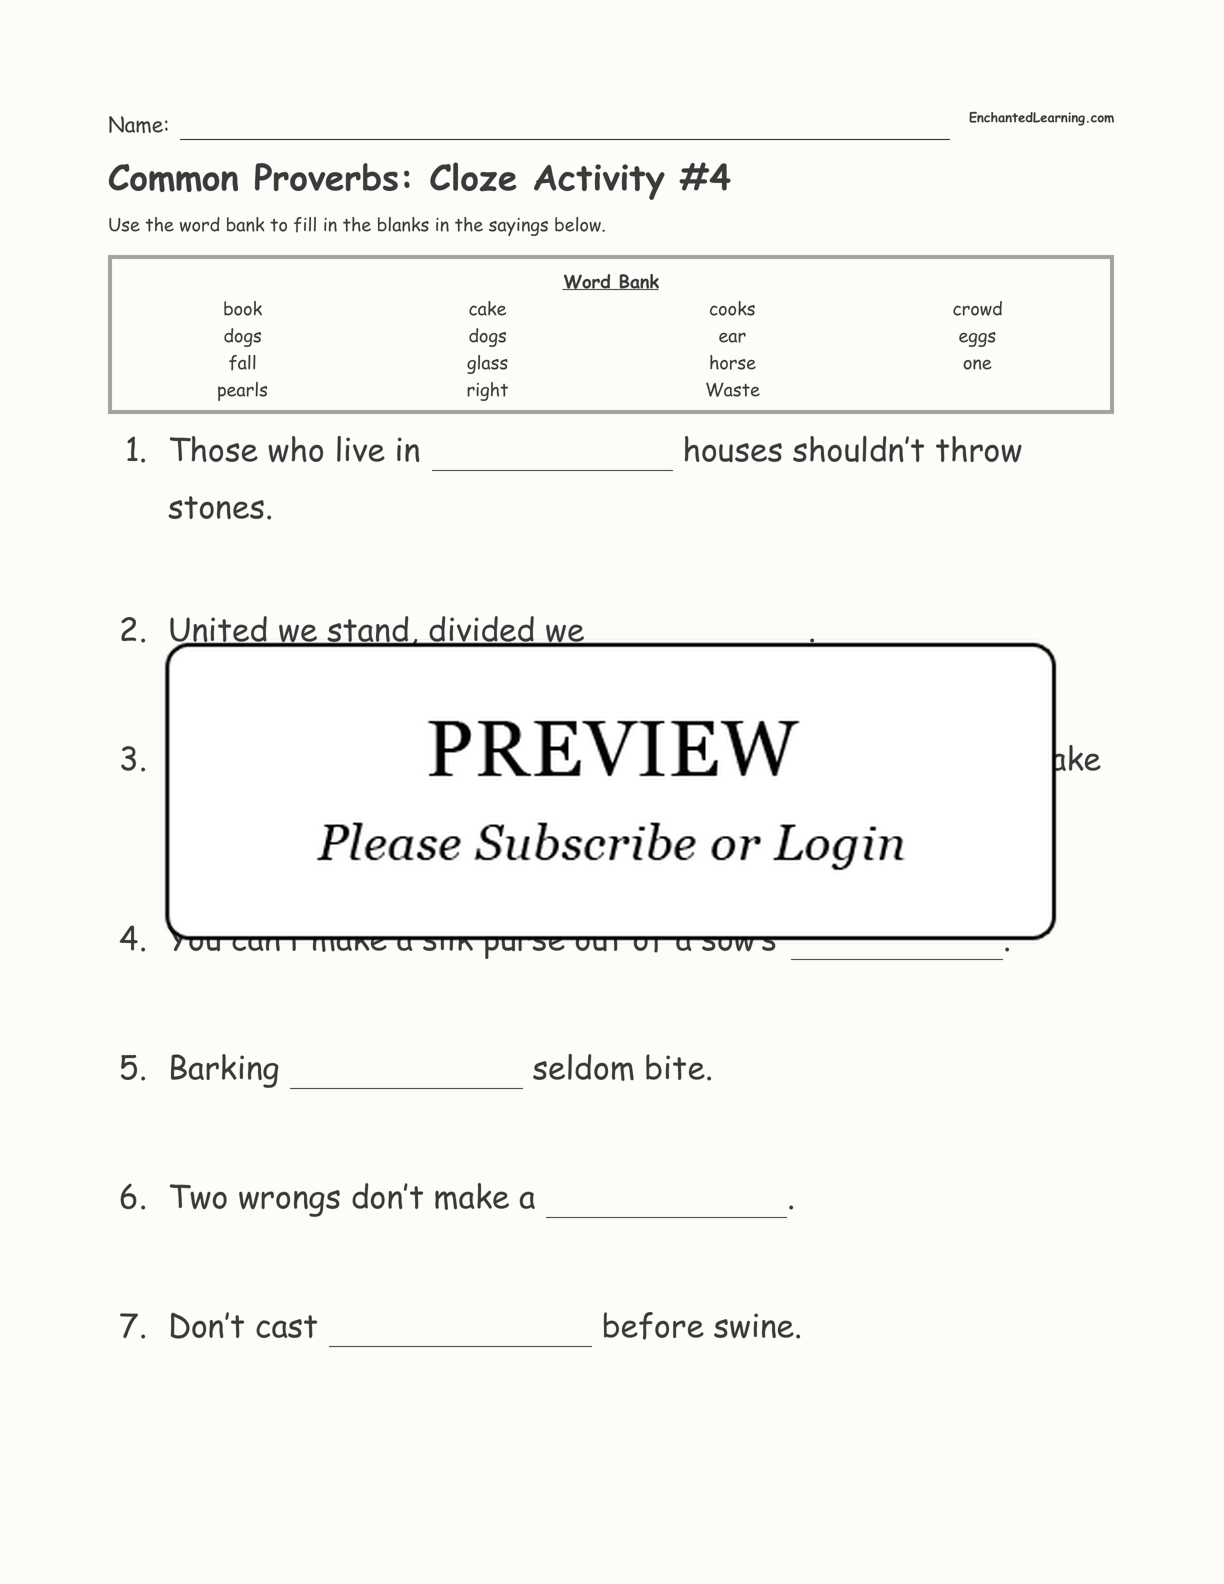 Common Proverbs: Cloze Activity #4 interactive worksheet page 1